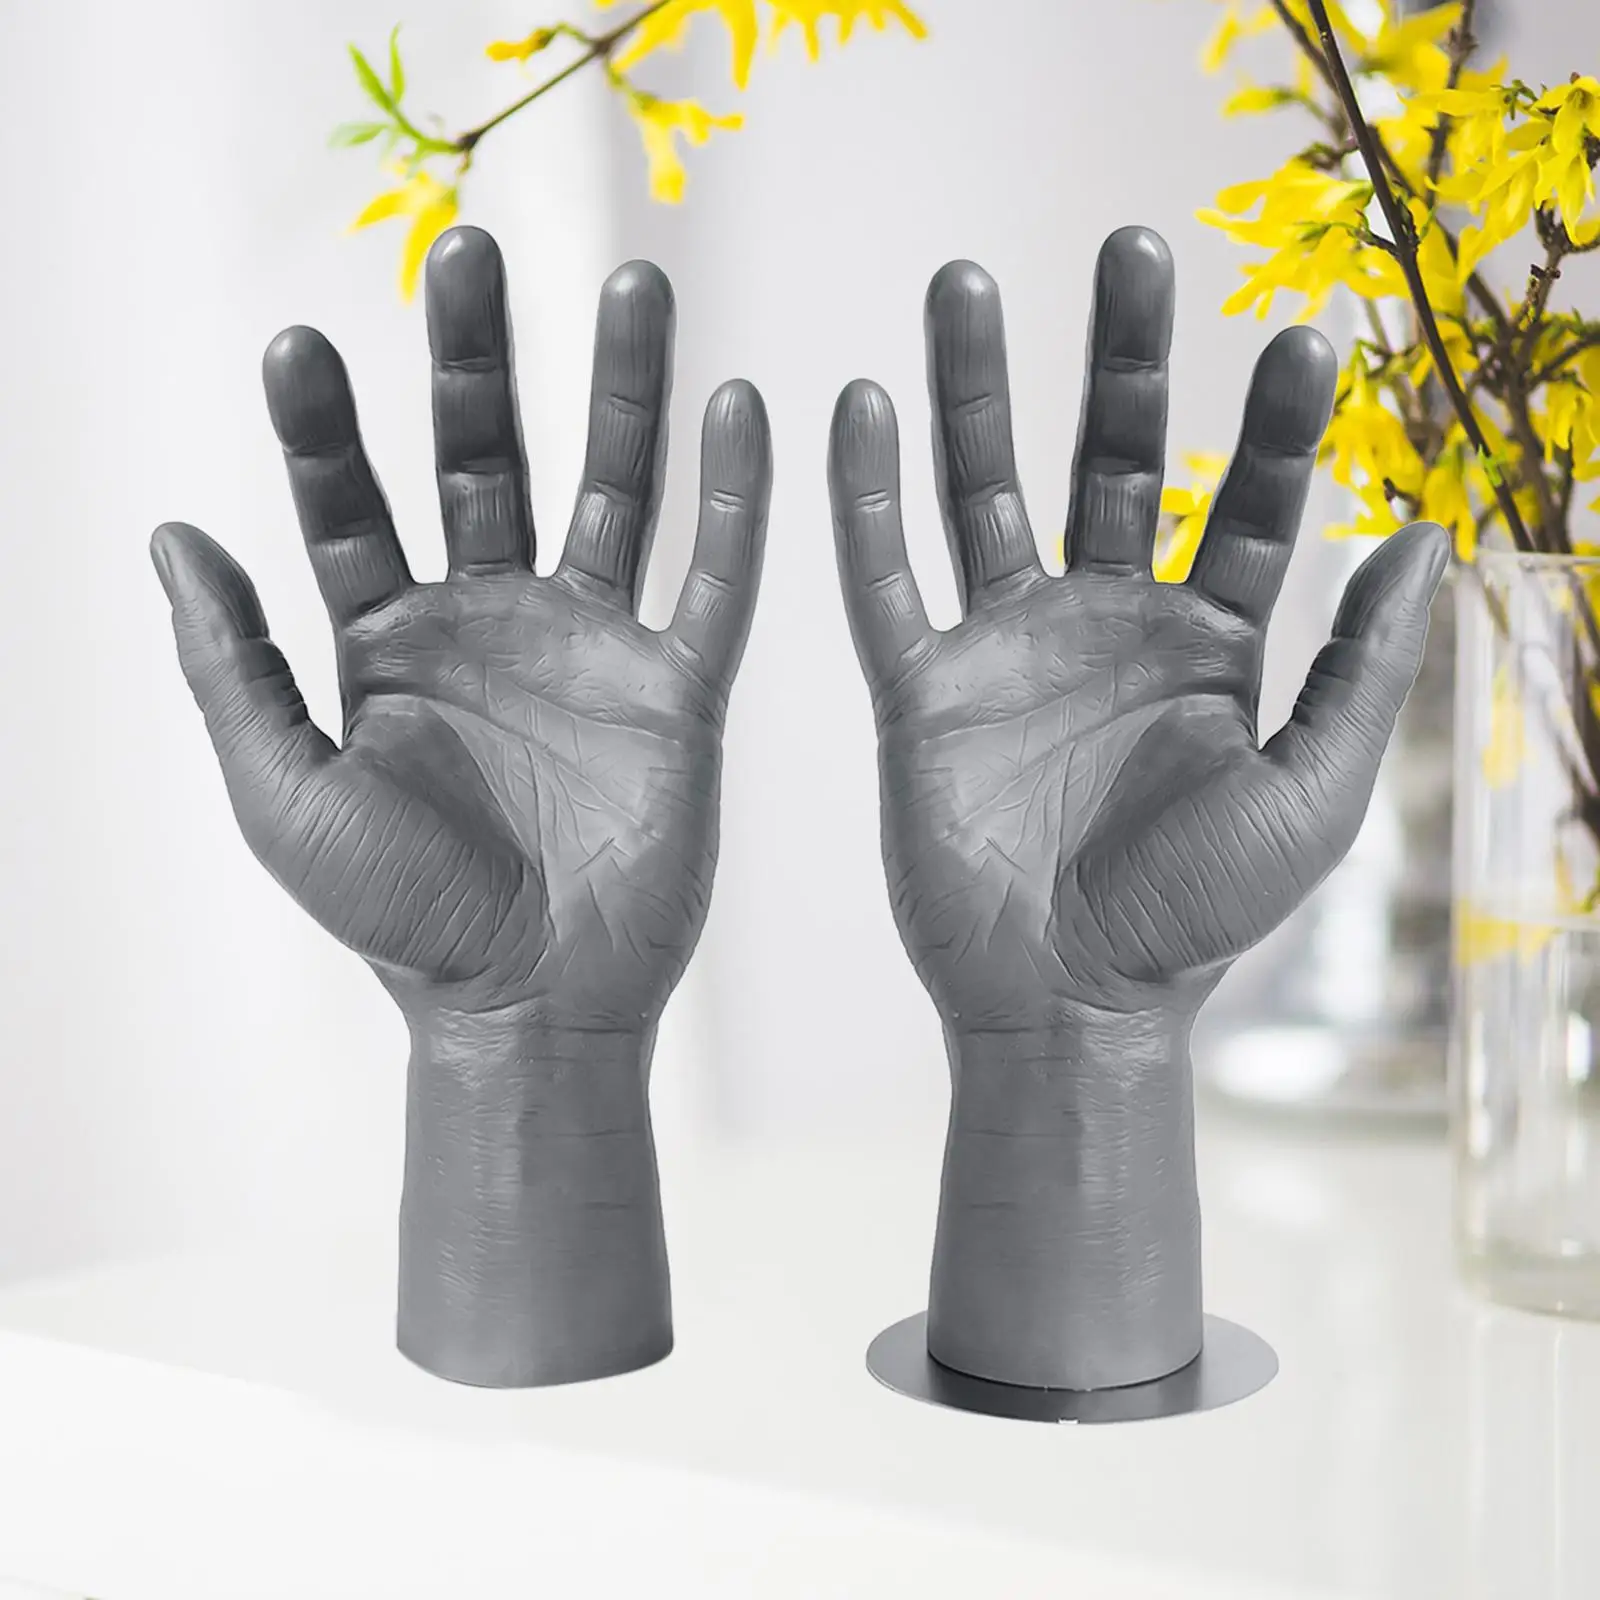 PVC Male  `s Hand Displays Bracelet  Stand Holder Showing for Home Decor Gray